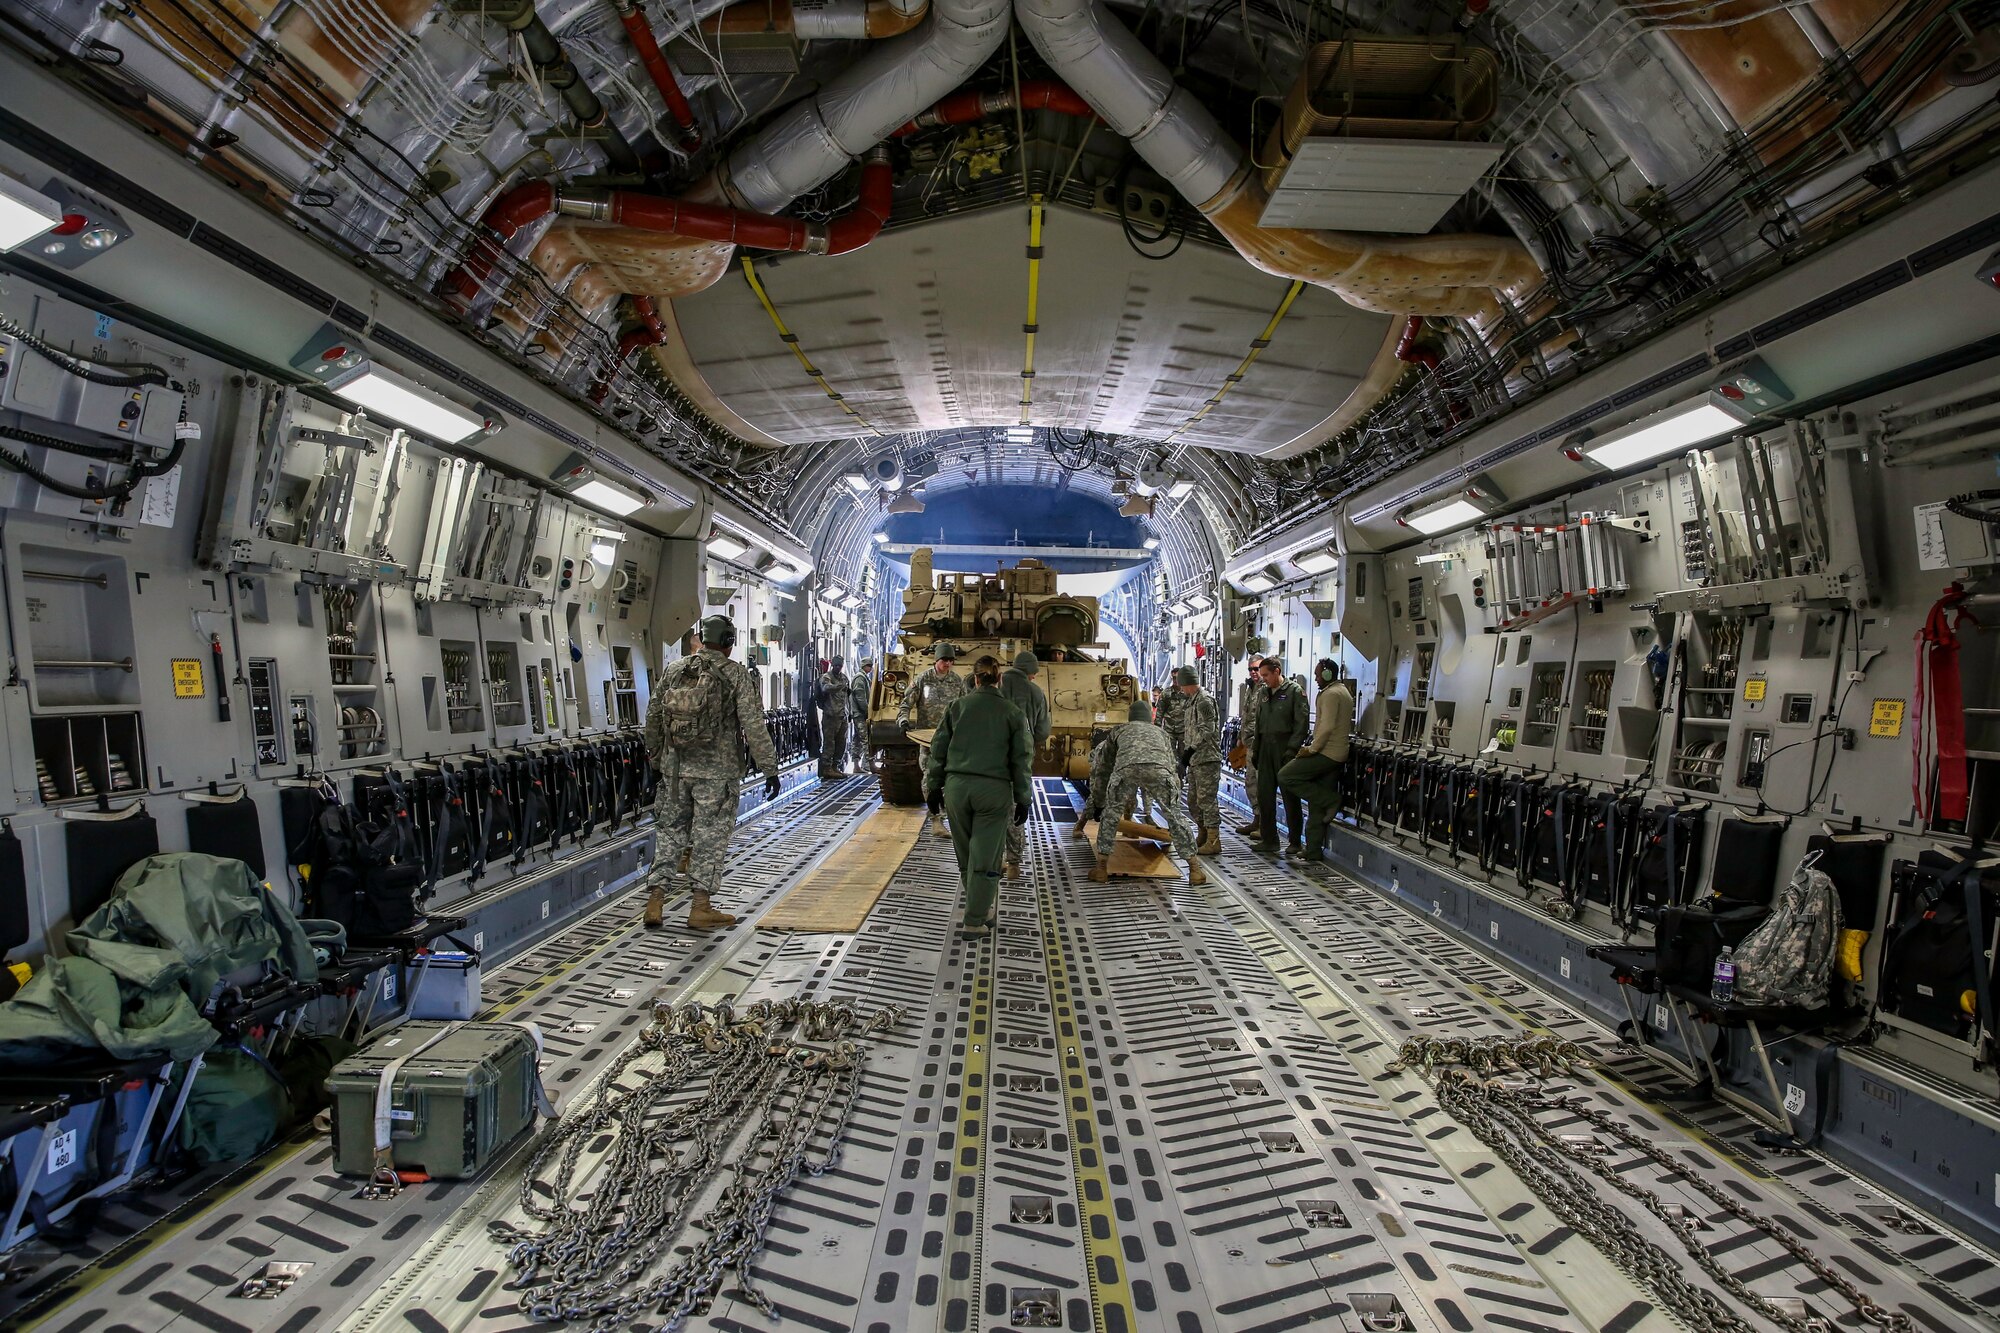 Soldiers from the U.S. Army’s 3rd Infantry Division stationed at Fort Stewart, Ga. and Airmen from the 315th Airlift Wing at Joint Base Charleston, S.C. work to properly position an M2A3 Bradley Fighting Vehicle in the cargo compartment of the C-17 Globemaster III Dec. 11, 2014 at Hunter Army Airfield, Ga. The vehicle was used as cargo during a two-day exercise which integrated C-17 air and ground crew training for 315th Airlift Wing Airmen stationed at Joint Base Charleston, S.C. as well as Soldiers from one of the 3rd Infantry Division’s Immediate Ready Companies who can deploy within 22 hours. Four C-17’s were used during the exercise to deploy and redeploy two Abrams M1A2 tanks, an M88 recovery vehicle and two M2A3 Bradley Fighting Vehicles. (U.S. Air Force photo by Tech. Sgt. Shane Ellis)